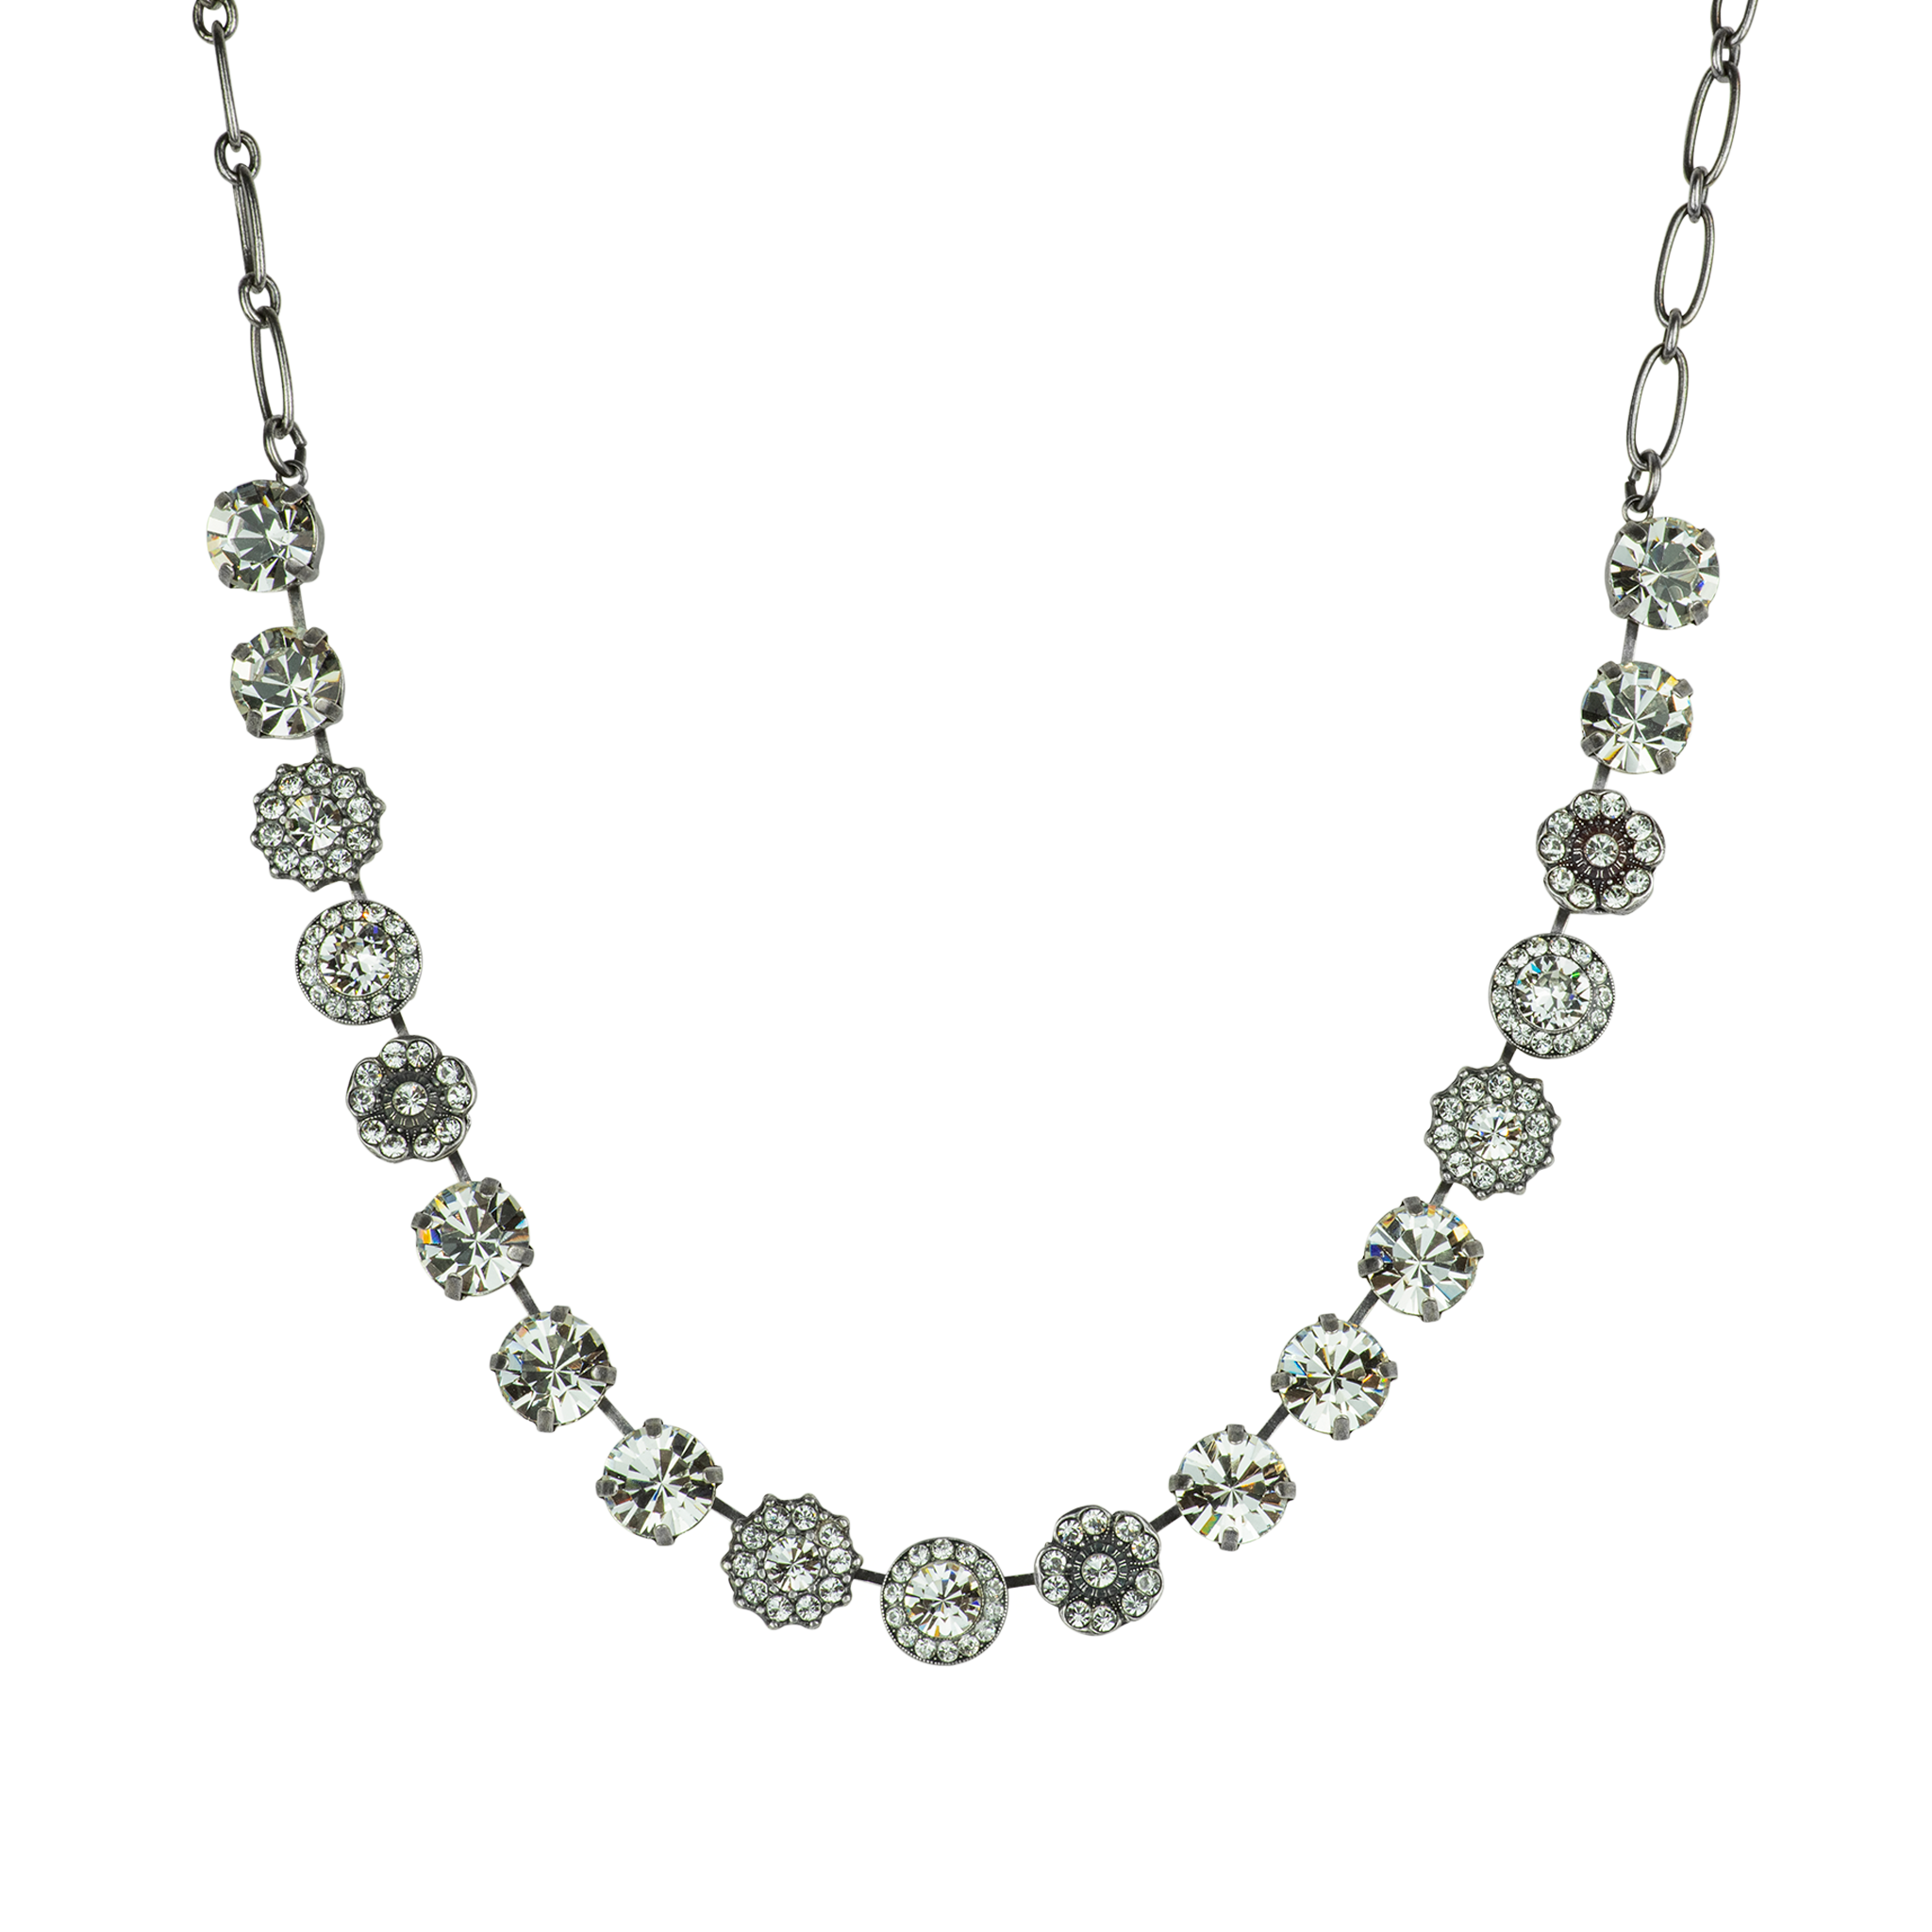 Mariana Rhodium Plated Large Rosette Necklace in "On a Clear Day"